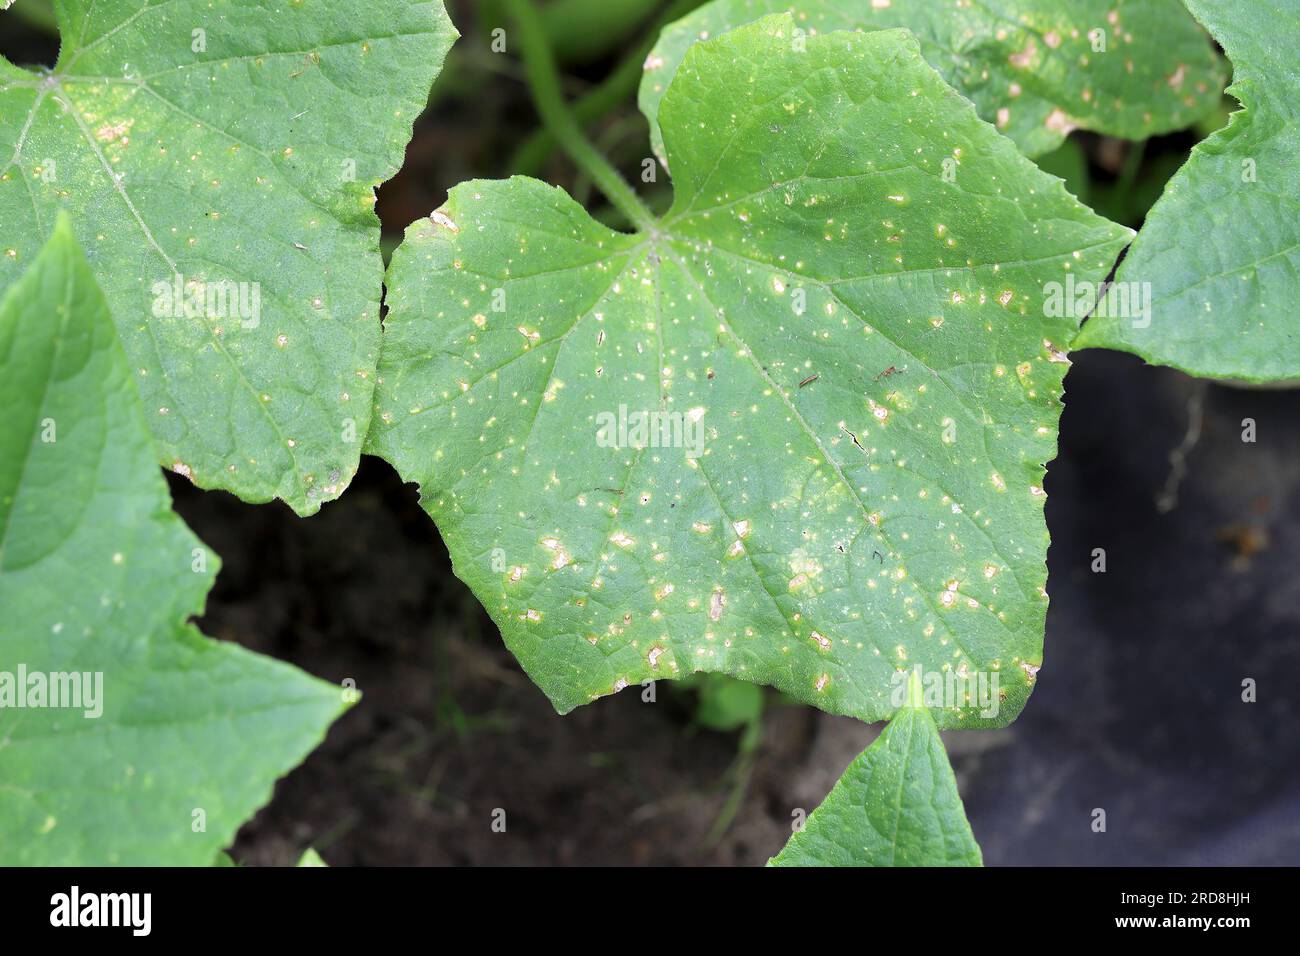 Cucumber leaves affected by downy mildew close-up. Cucumber disease Peronosporosis or False powdery mildew. Leaf with yellow spots. Stock Photo